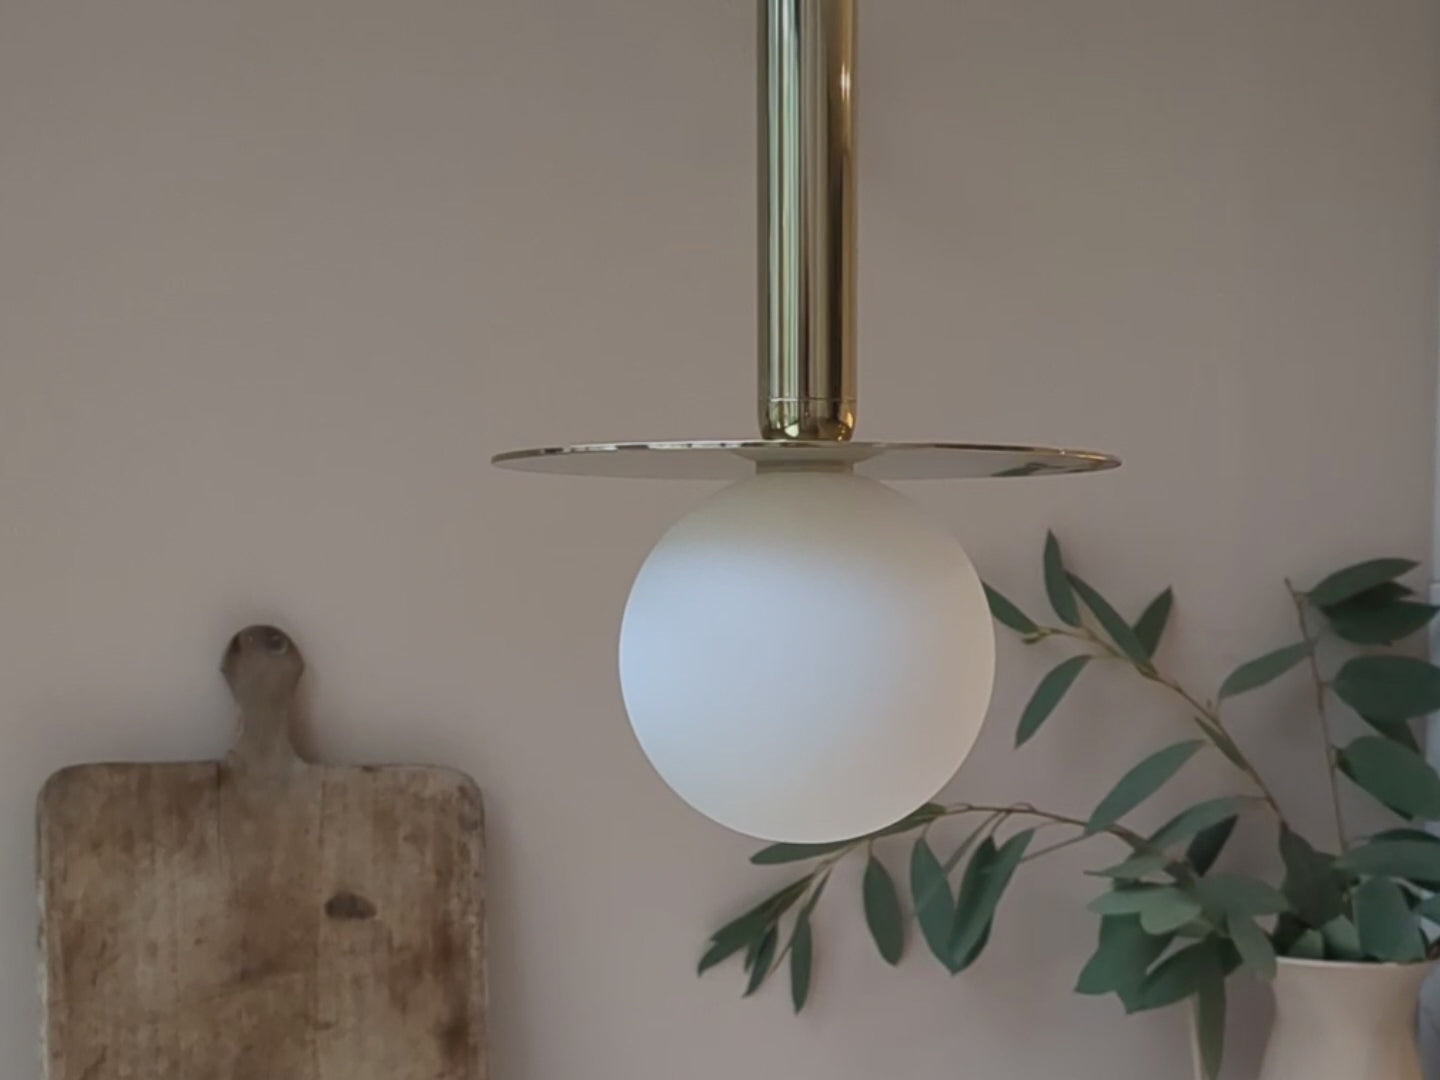 Close-up - from different angles - of a brass pendant ceiling light with a brass oval body and a horizontal brass metal plate that holds a white opal glass shade. Light is off.